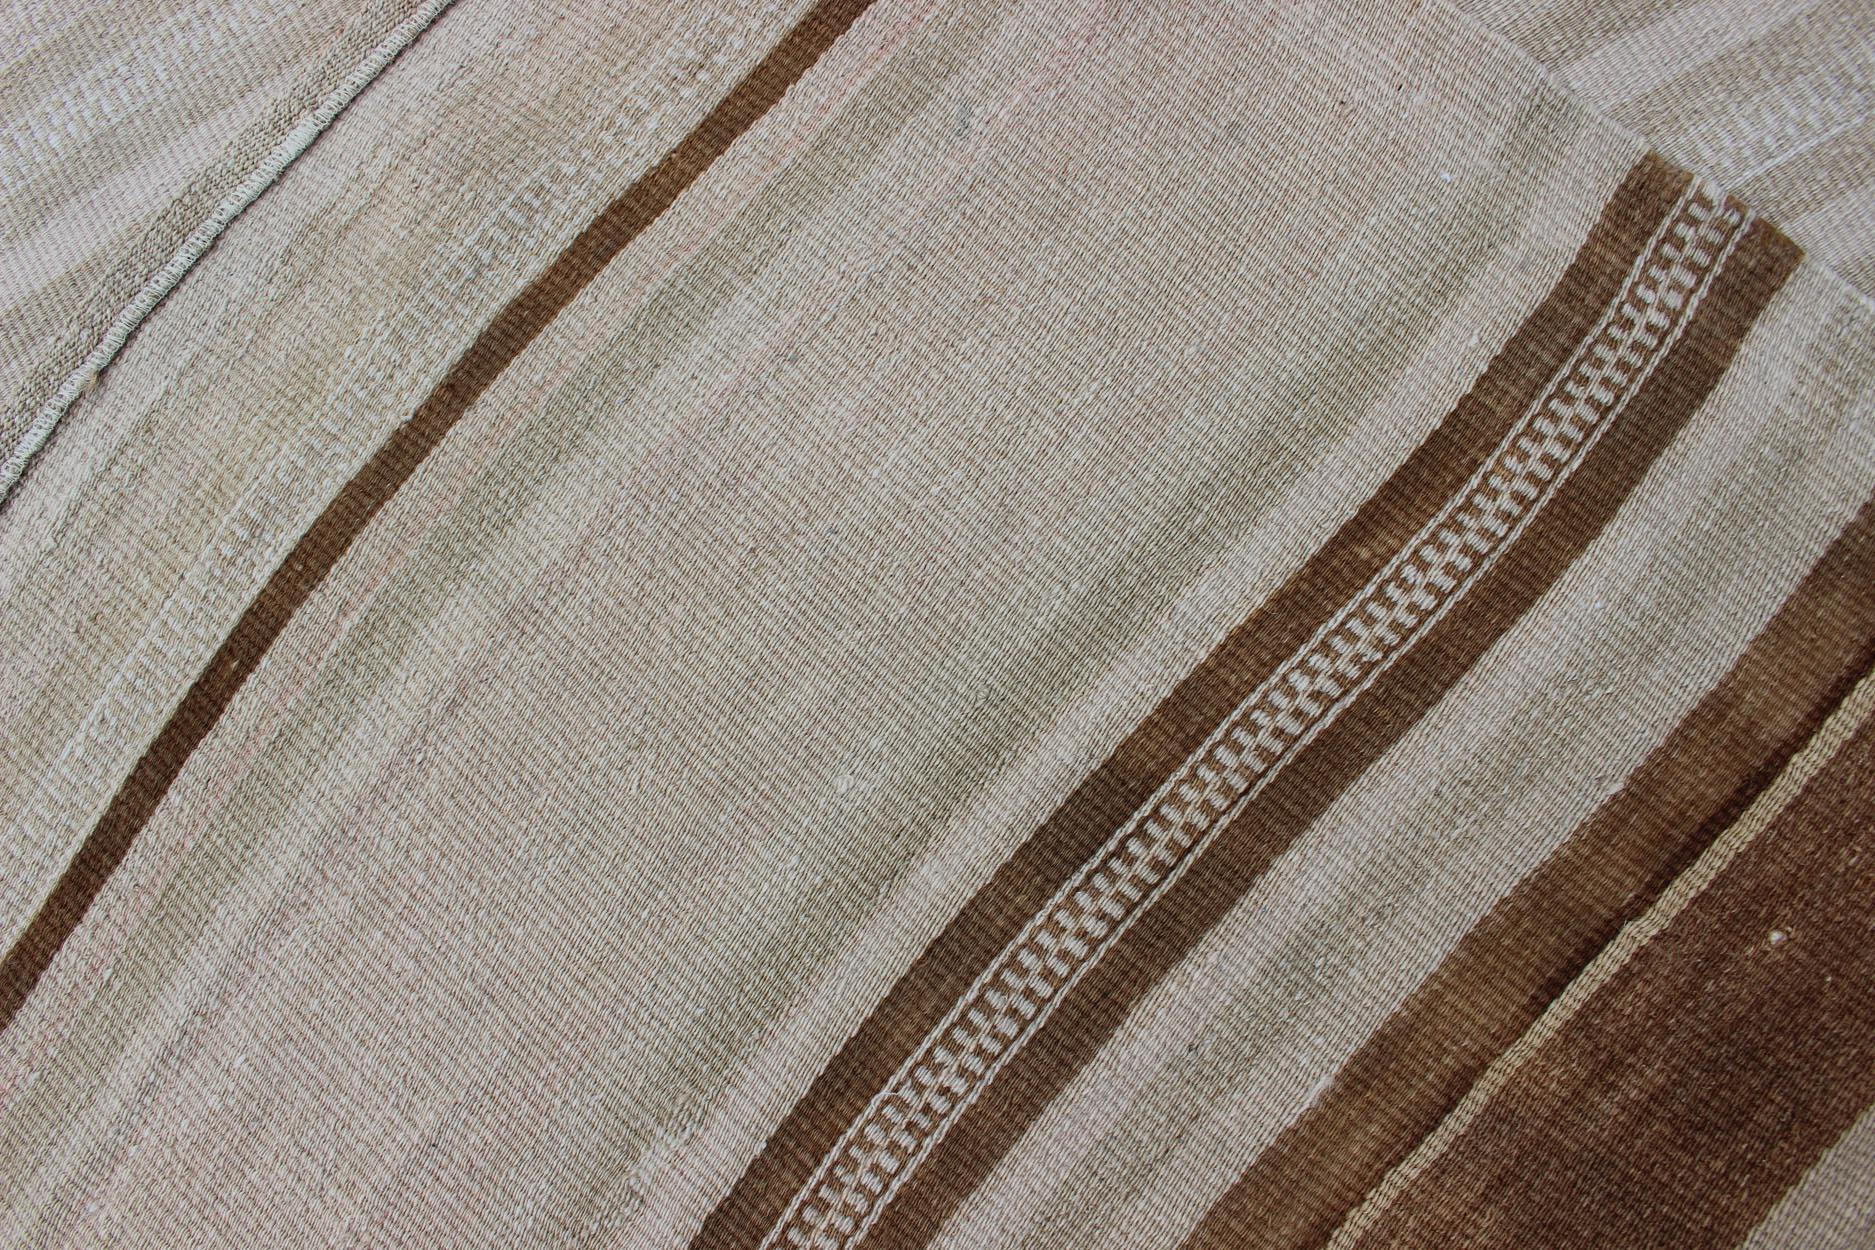 20th Century Vintage Turkish Kilim Runner with Stripes in Light Brown and Neutral Tones For Sale